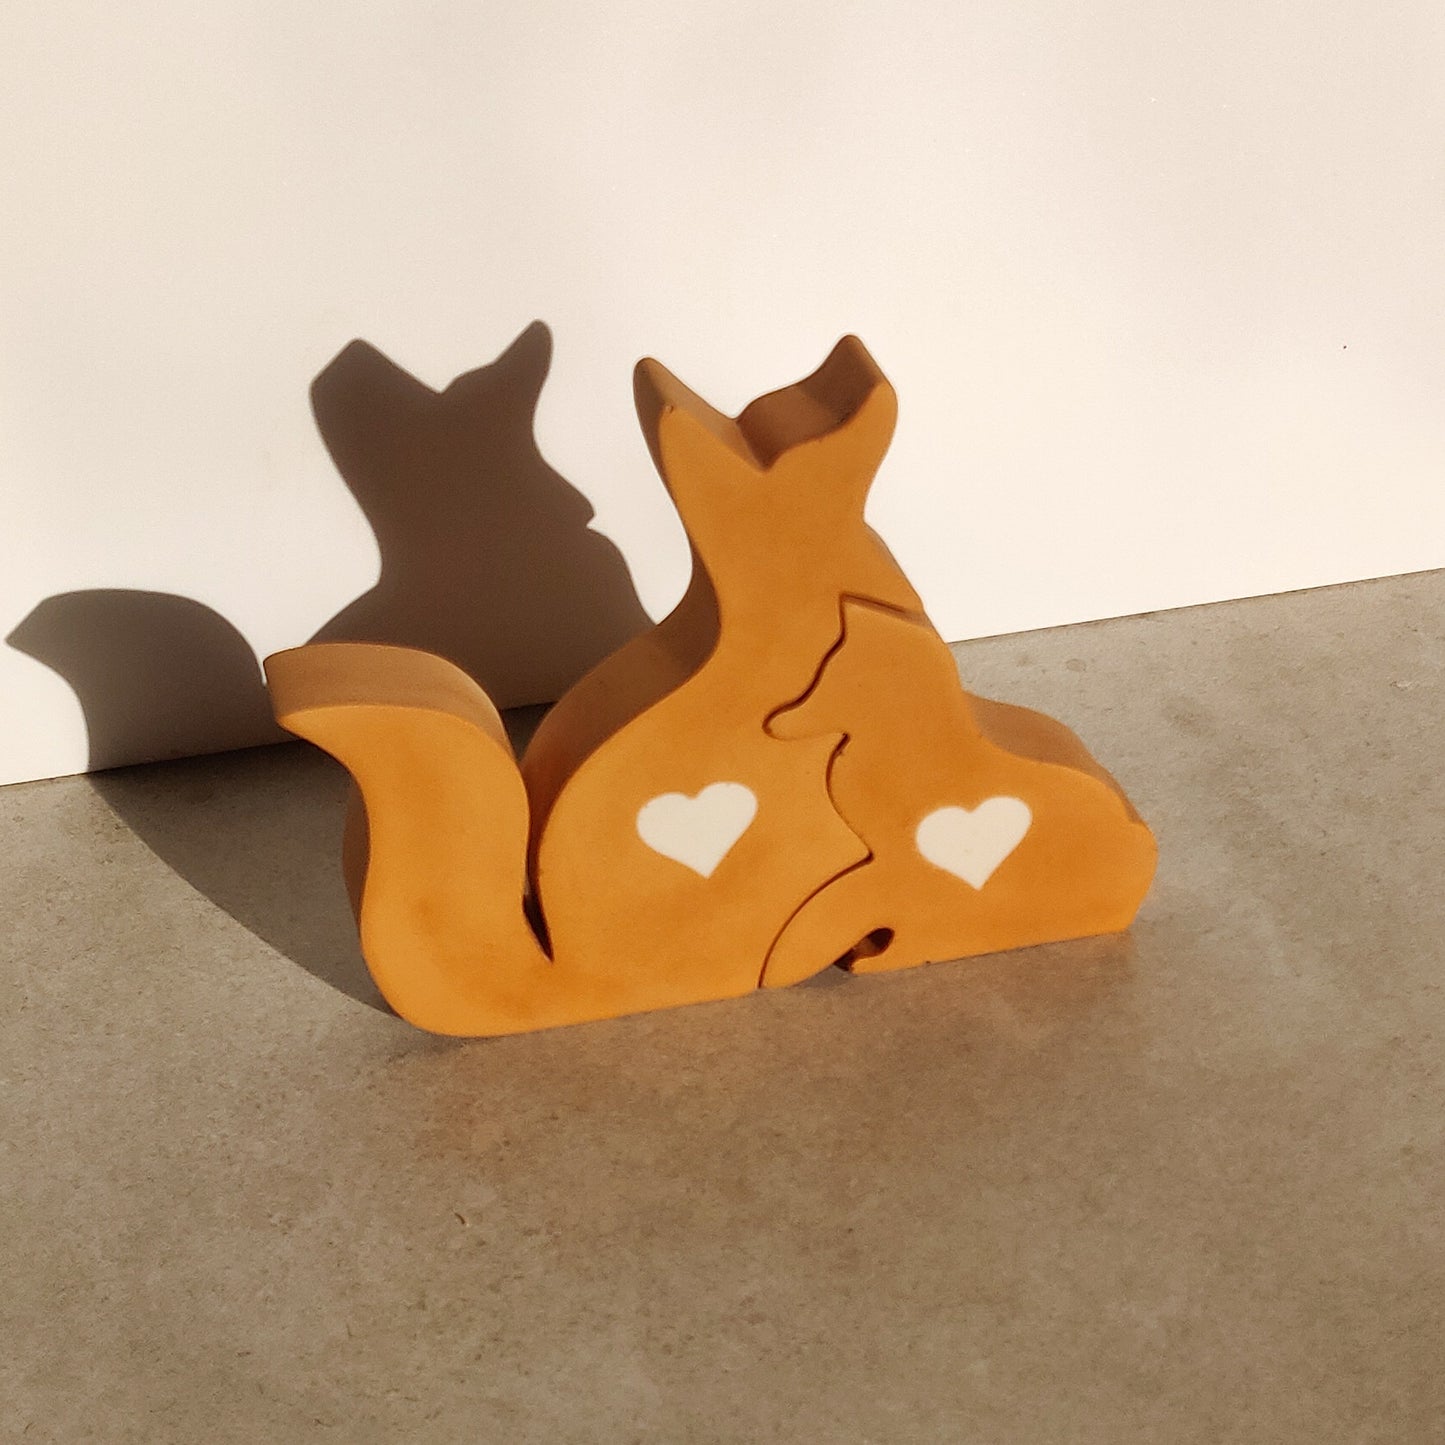 Cuddling Foxes Silhouette Ornament